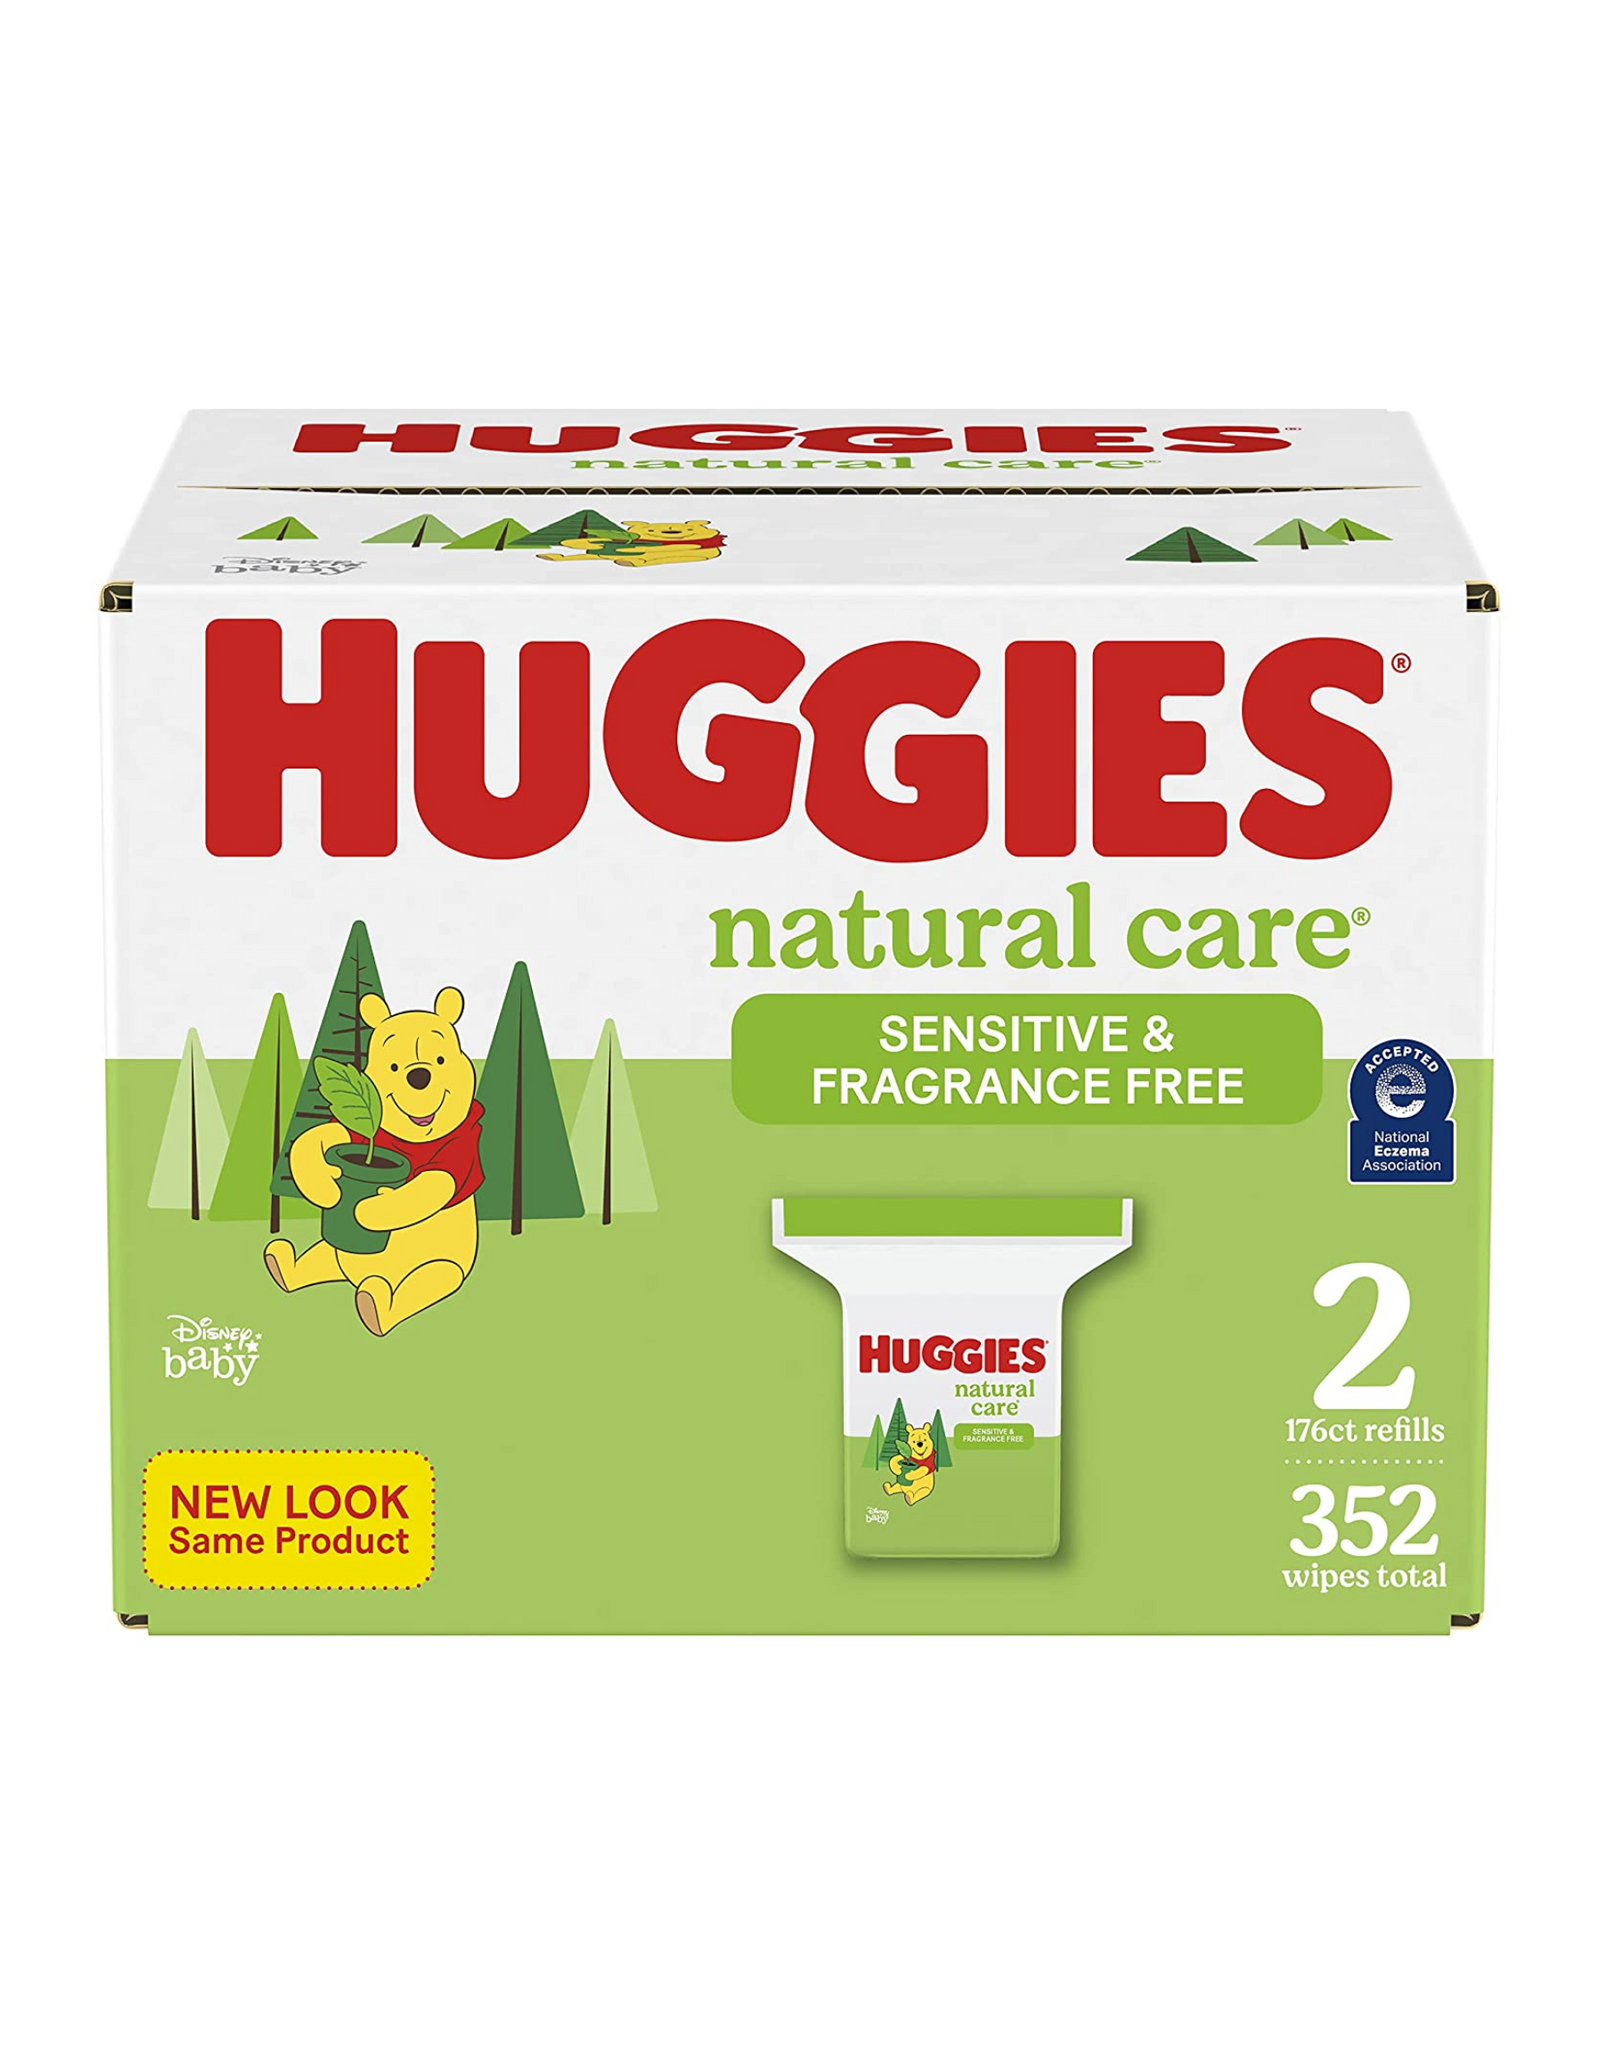 Baby Wipes, Huggies Natural Care Sensitive & Fragrance Free, 352 Wipes Total (2 Refill Packs)